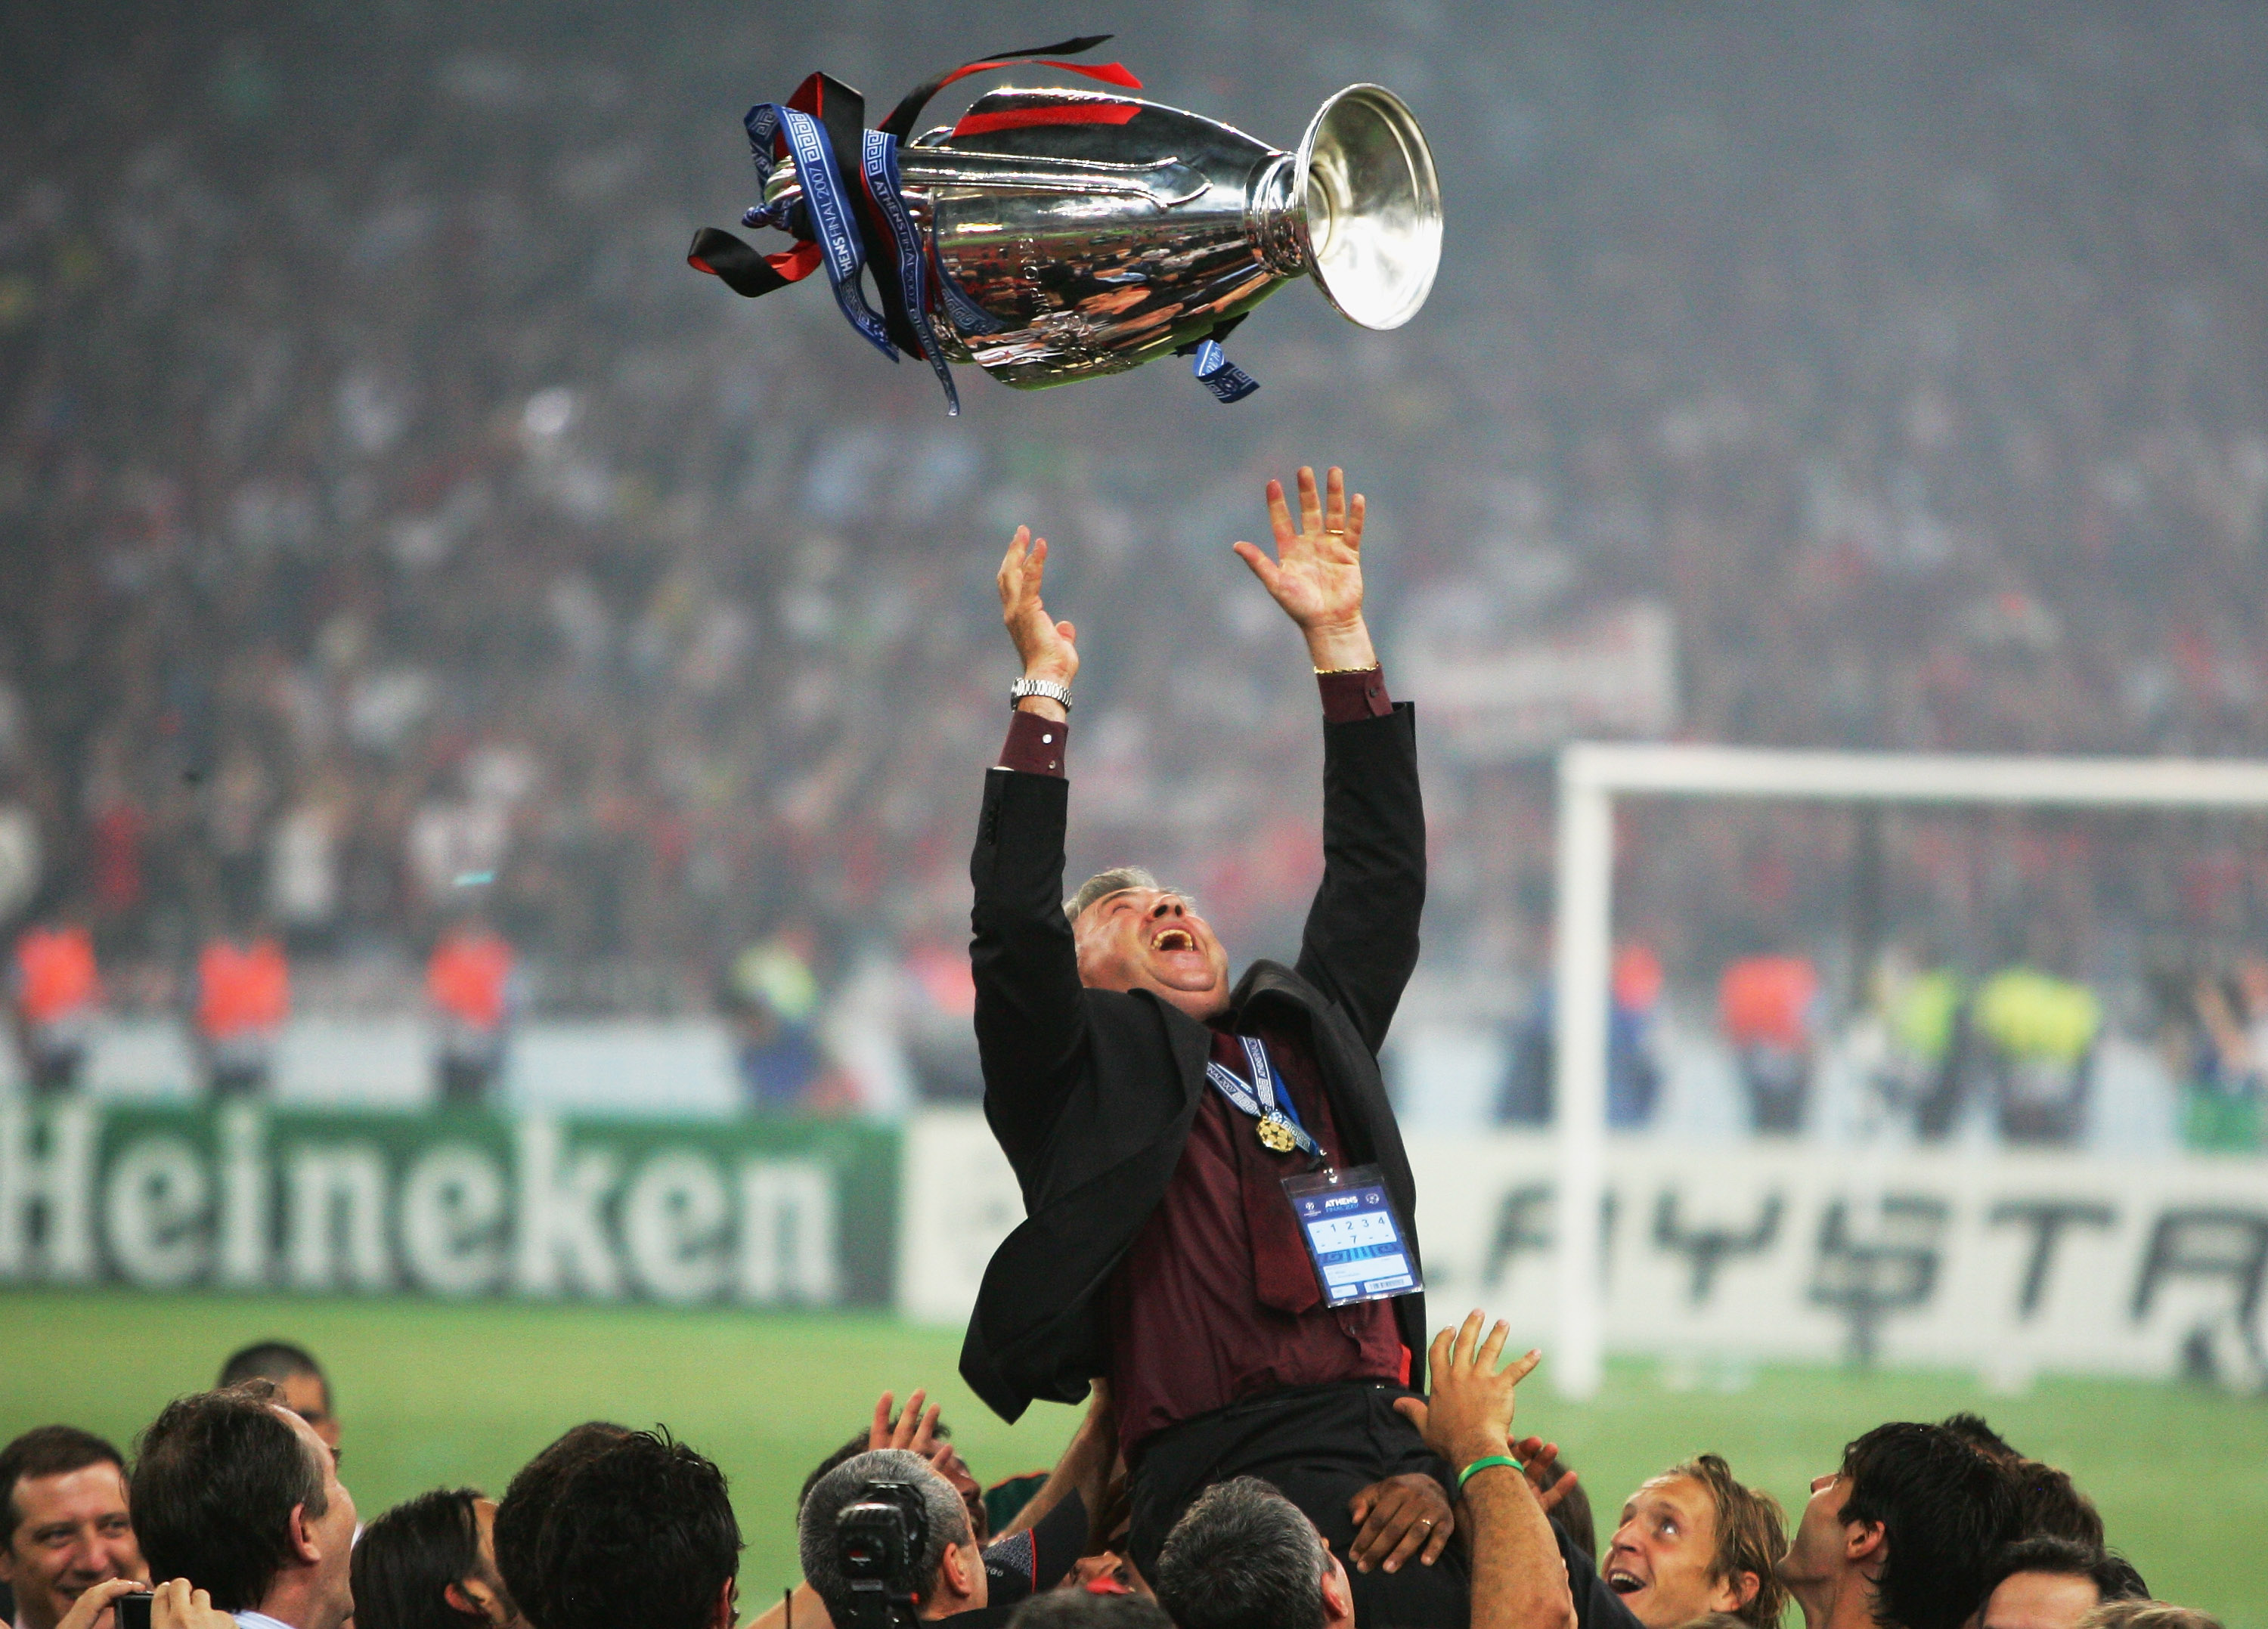 ATHENS, GREECE - MAY 23:  Carlo Ancelotti, the Milan manager throws the trophy in the air, whilst celebrating his teams 2-1 victoryduring the UEFA Champions League Final match between Liverpool and AC Milan at the Olympic Stadium on May 23, 2007 in Athens